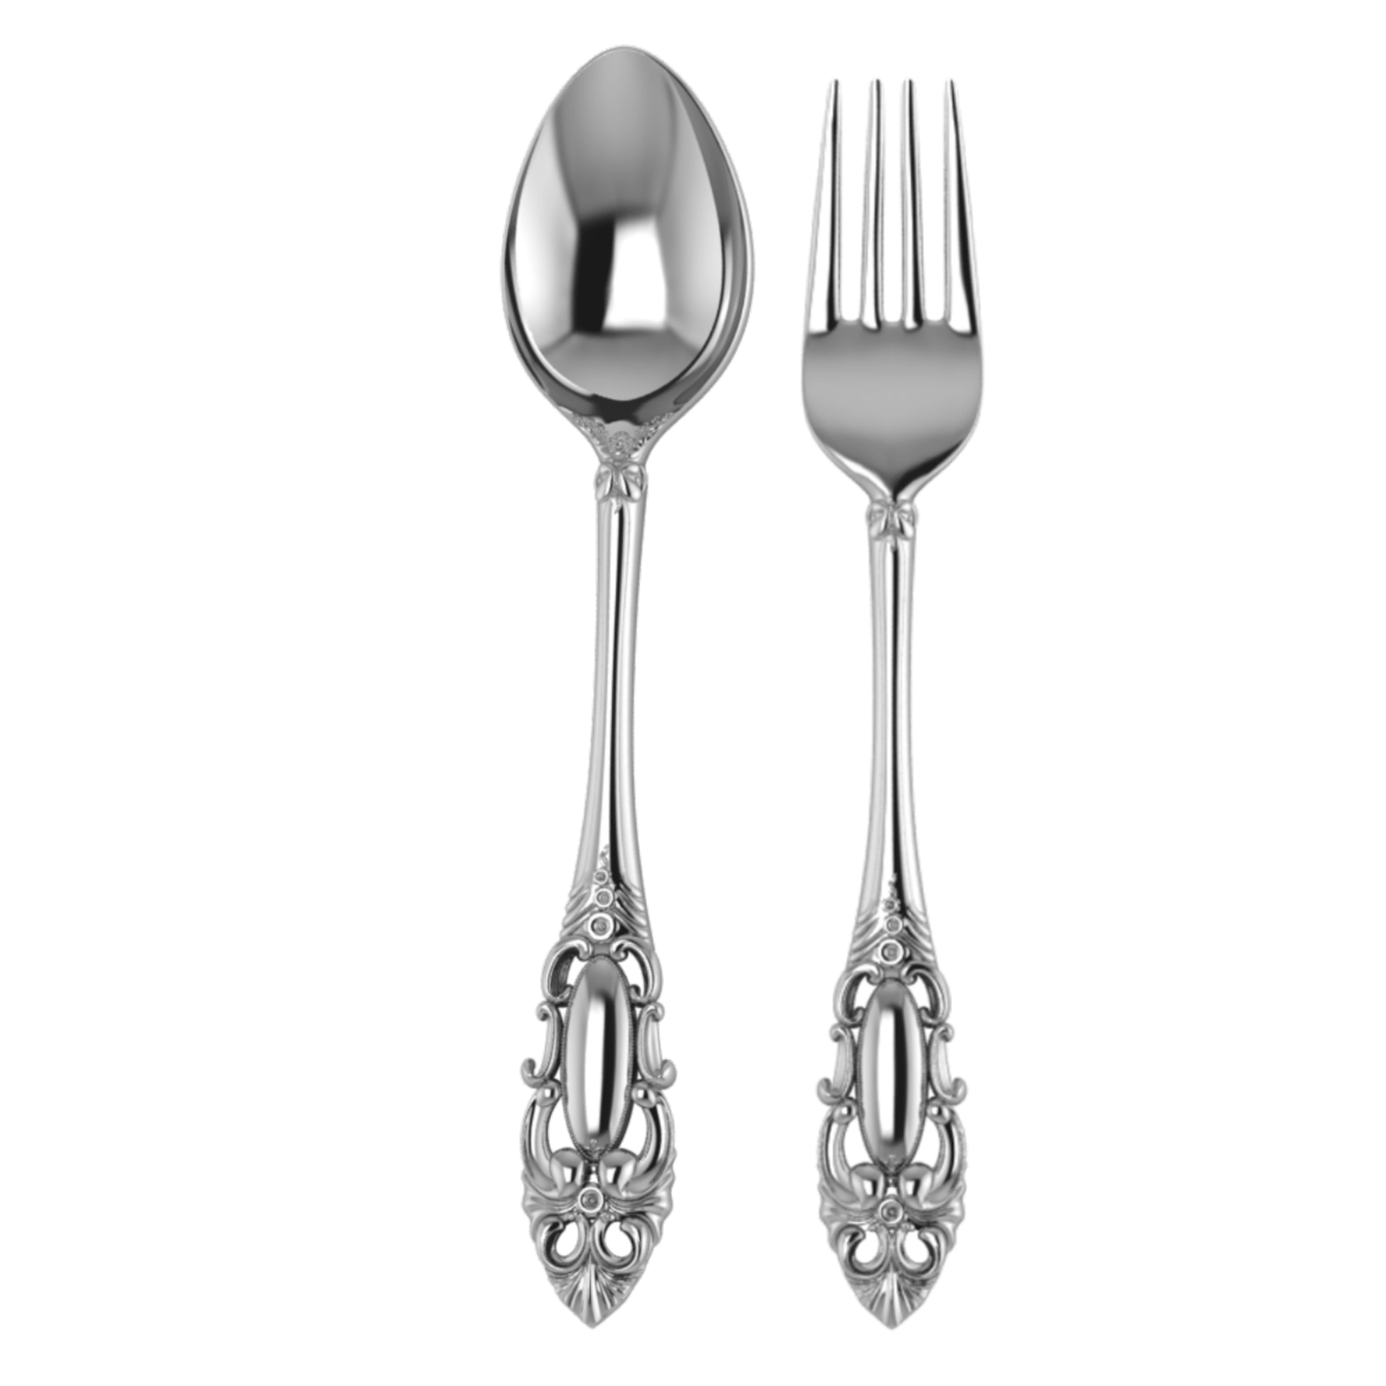 Sterling Silver Dinner Spoon & Fork Set - The Victorian Collection